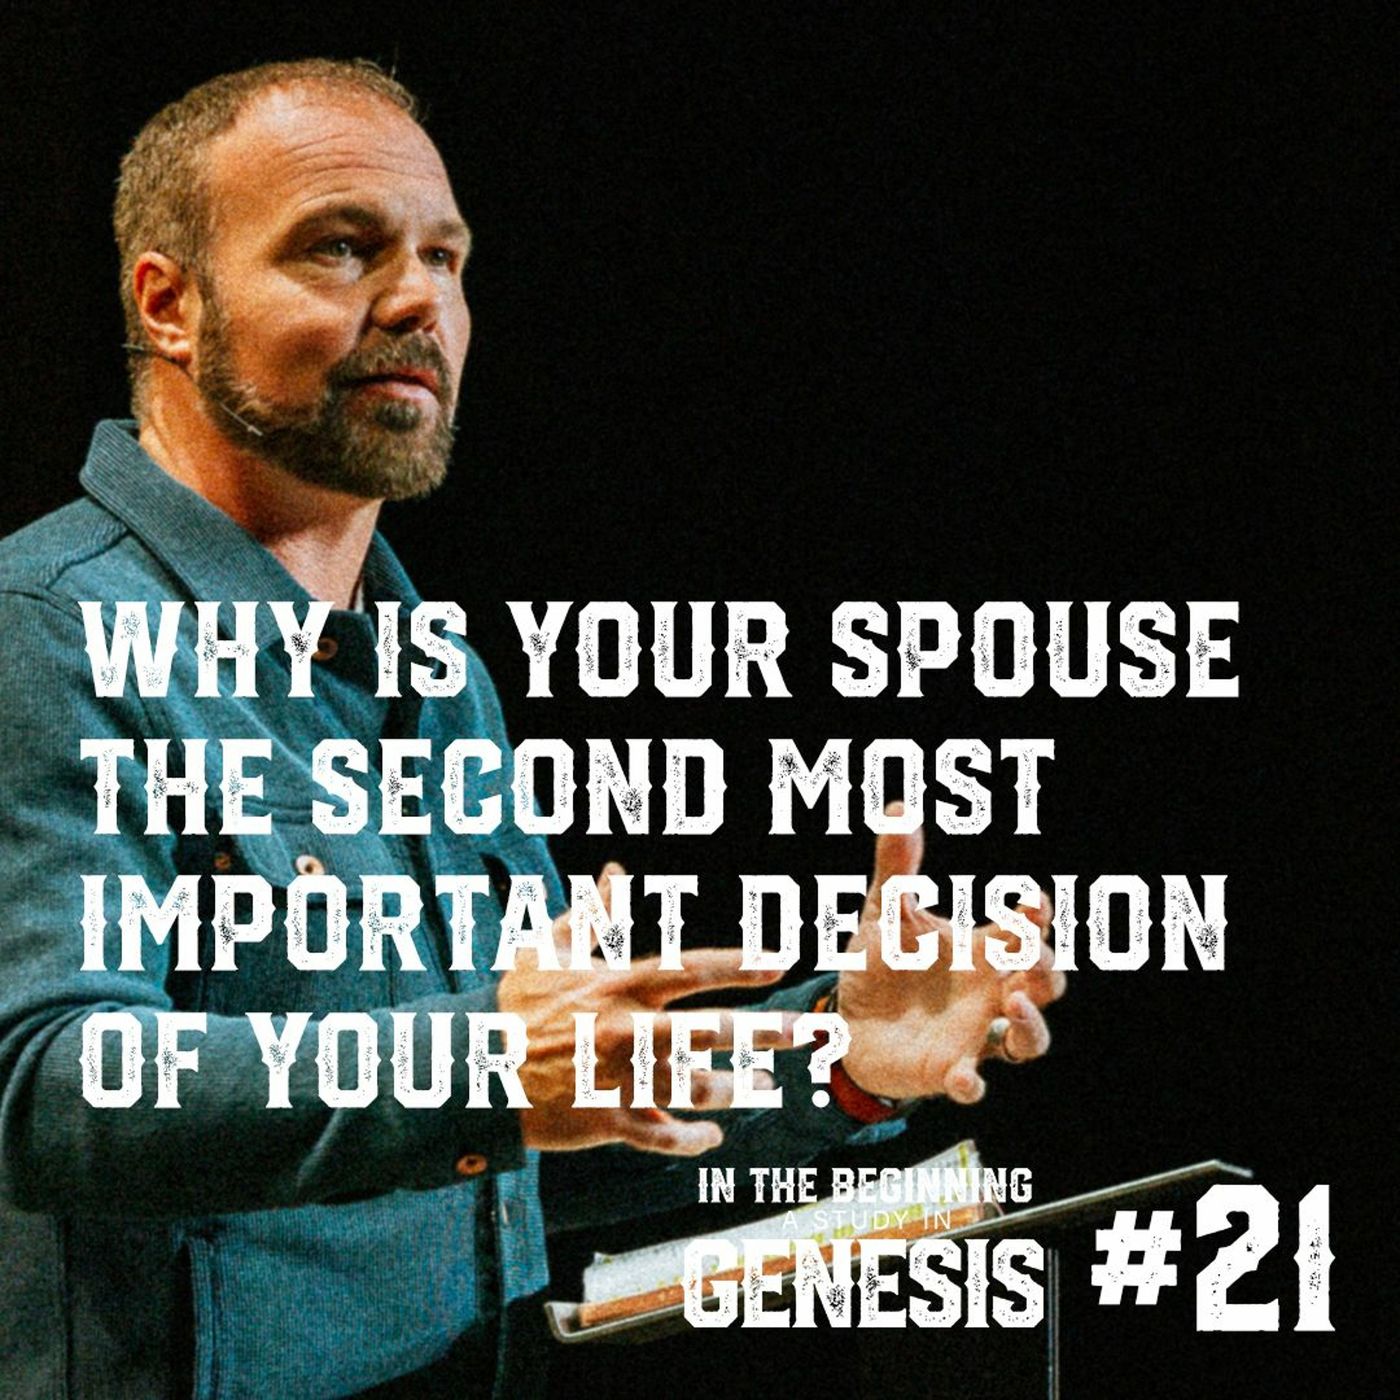 Genesis #21 - Why is Your Spouse the Second Most Important Decision of Your Life?